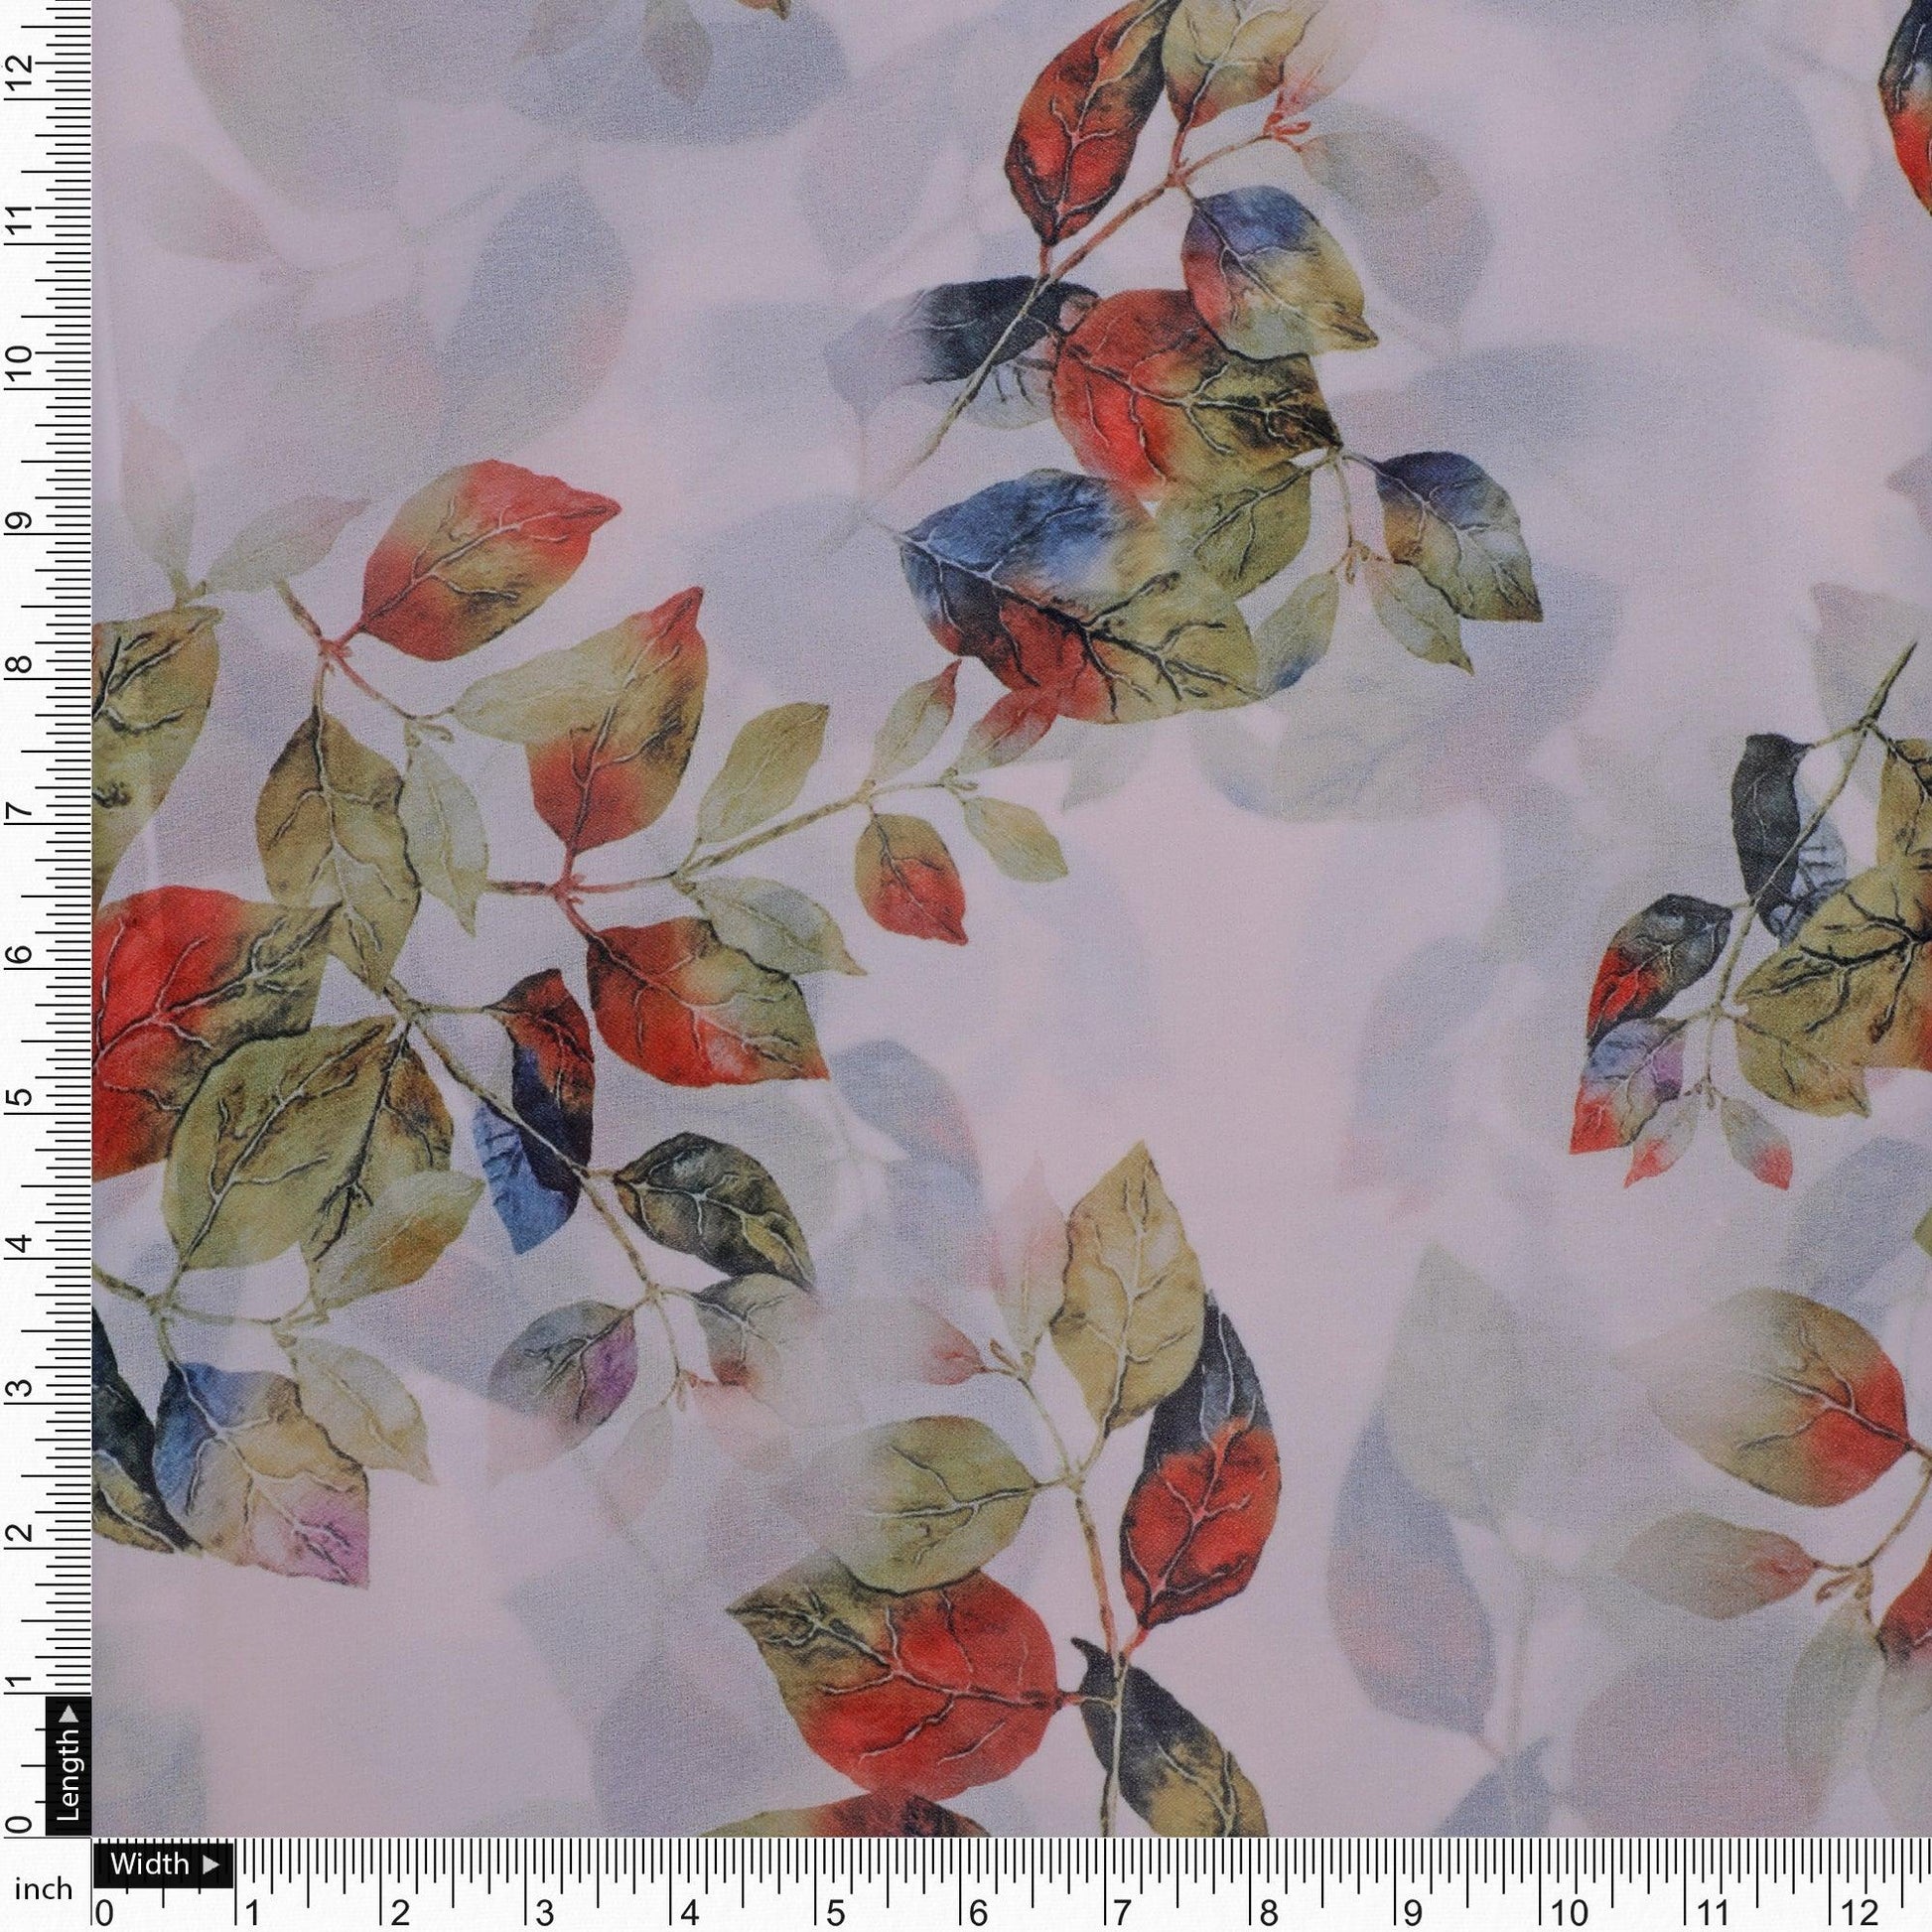 Lovely Small Goat Willow Leafs Digital Printed Fabric - Weightless - FAB VOGUE Studio®